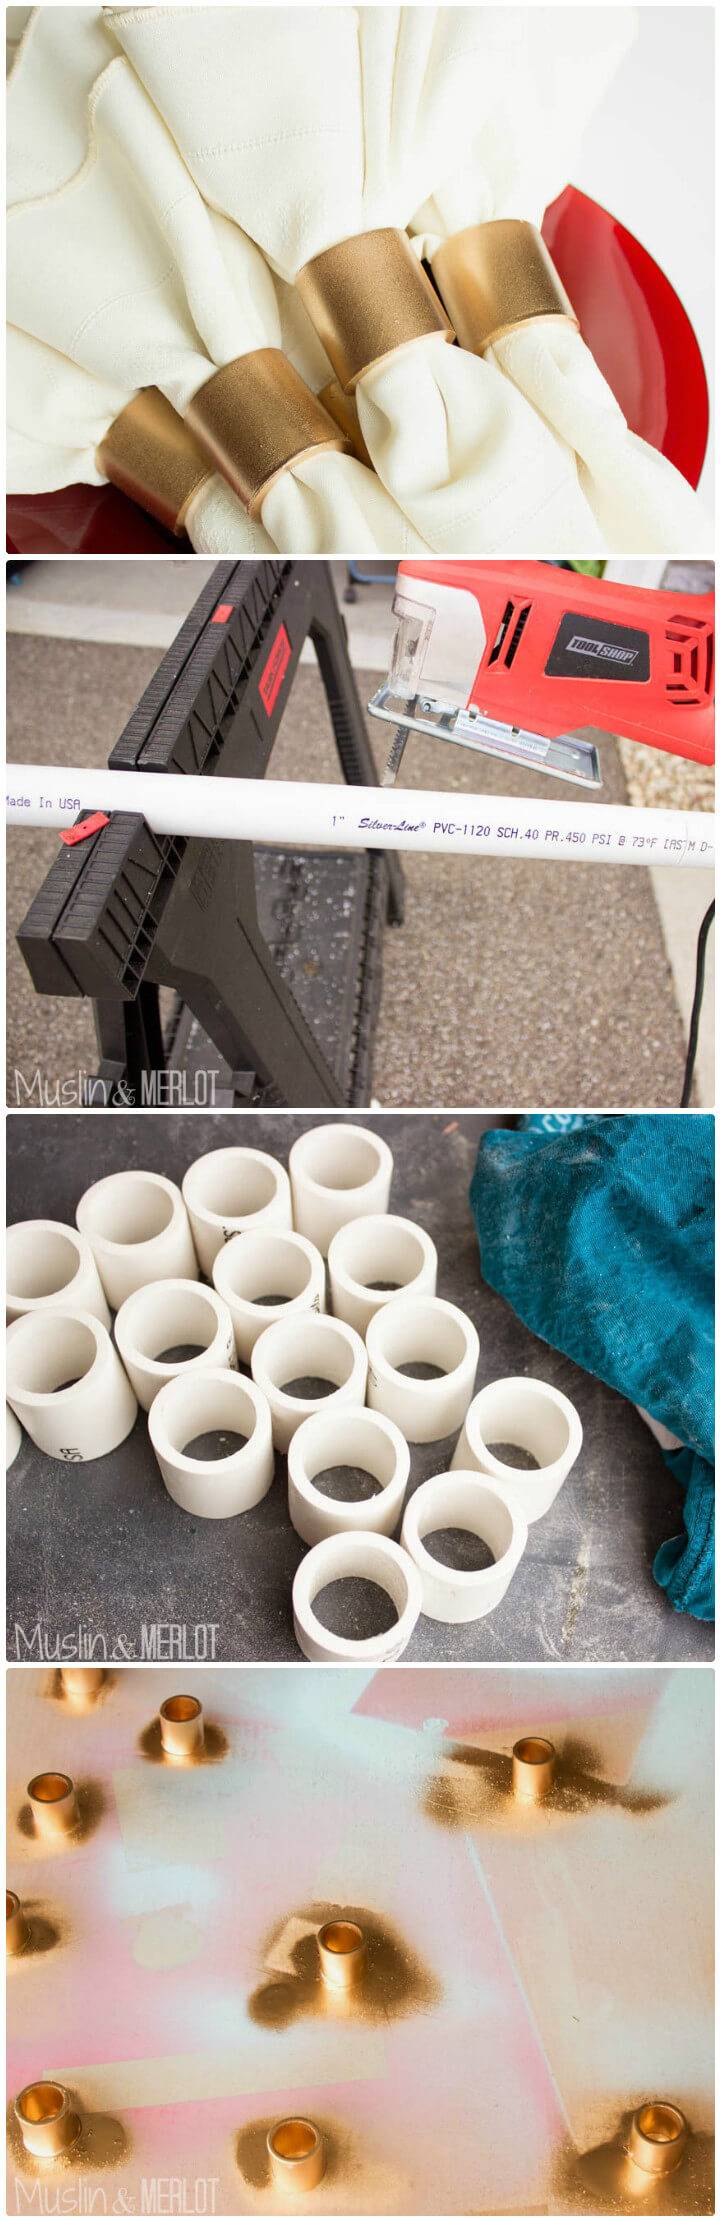 old pvc pipes into napkin rings